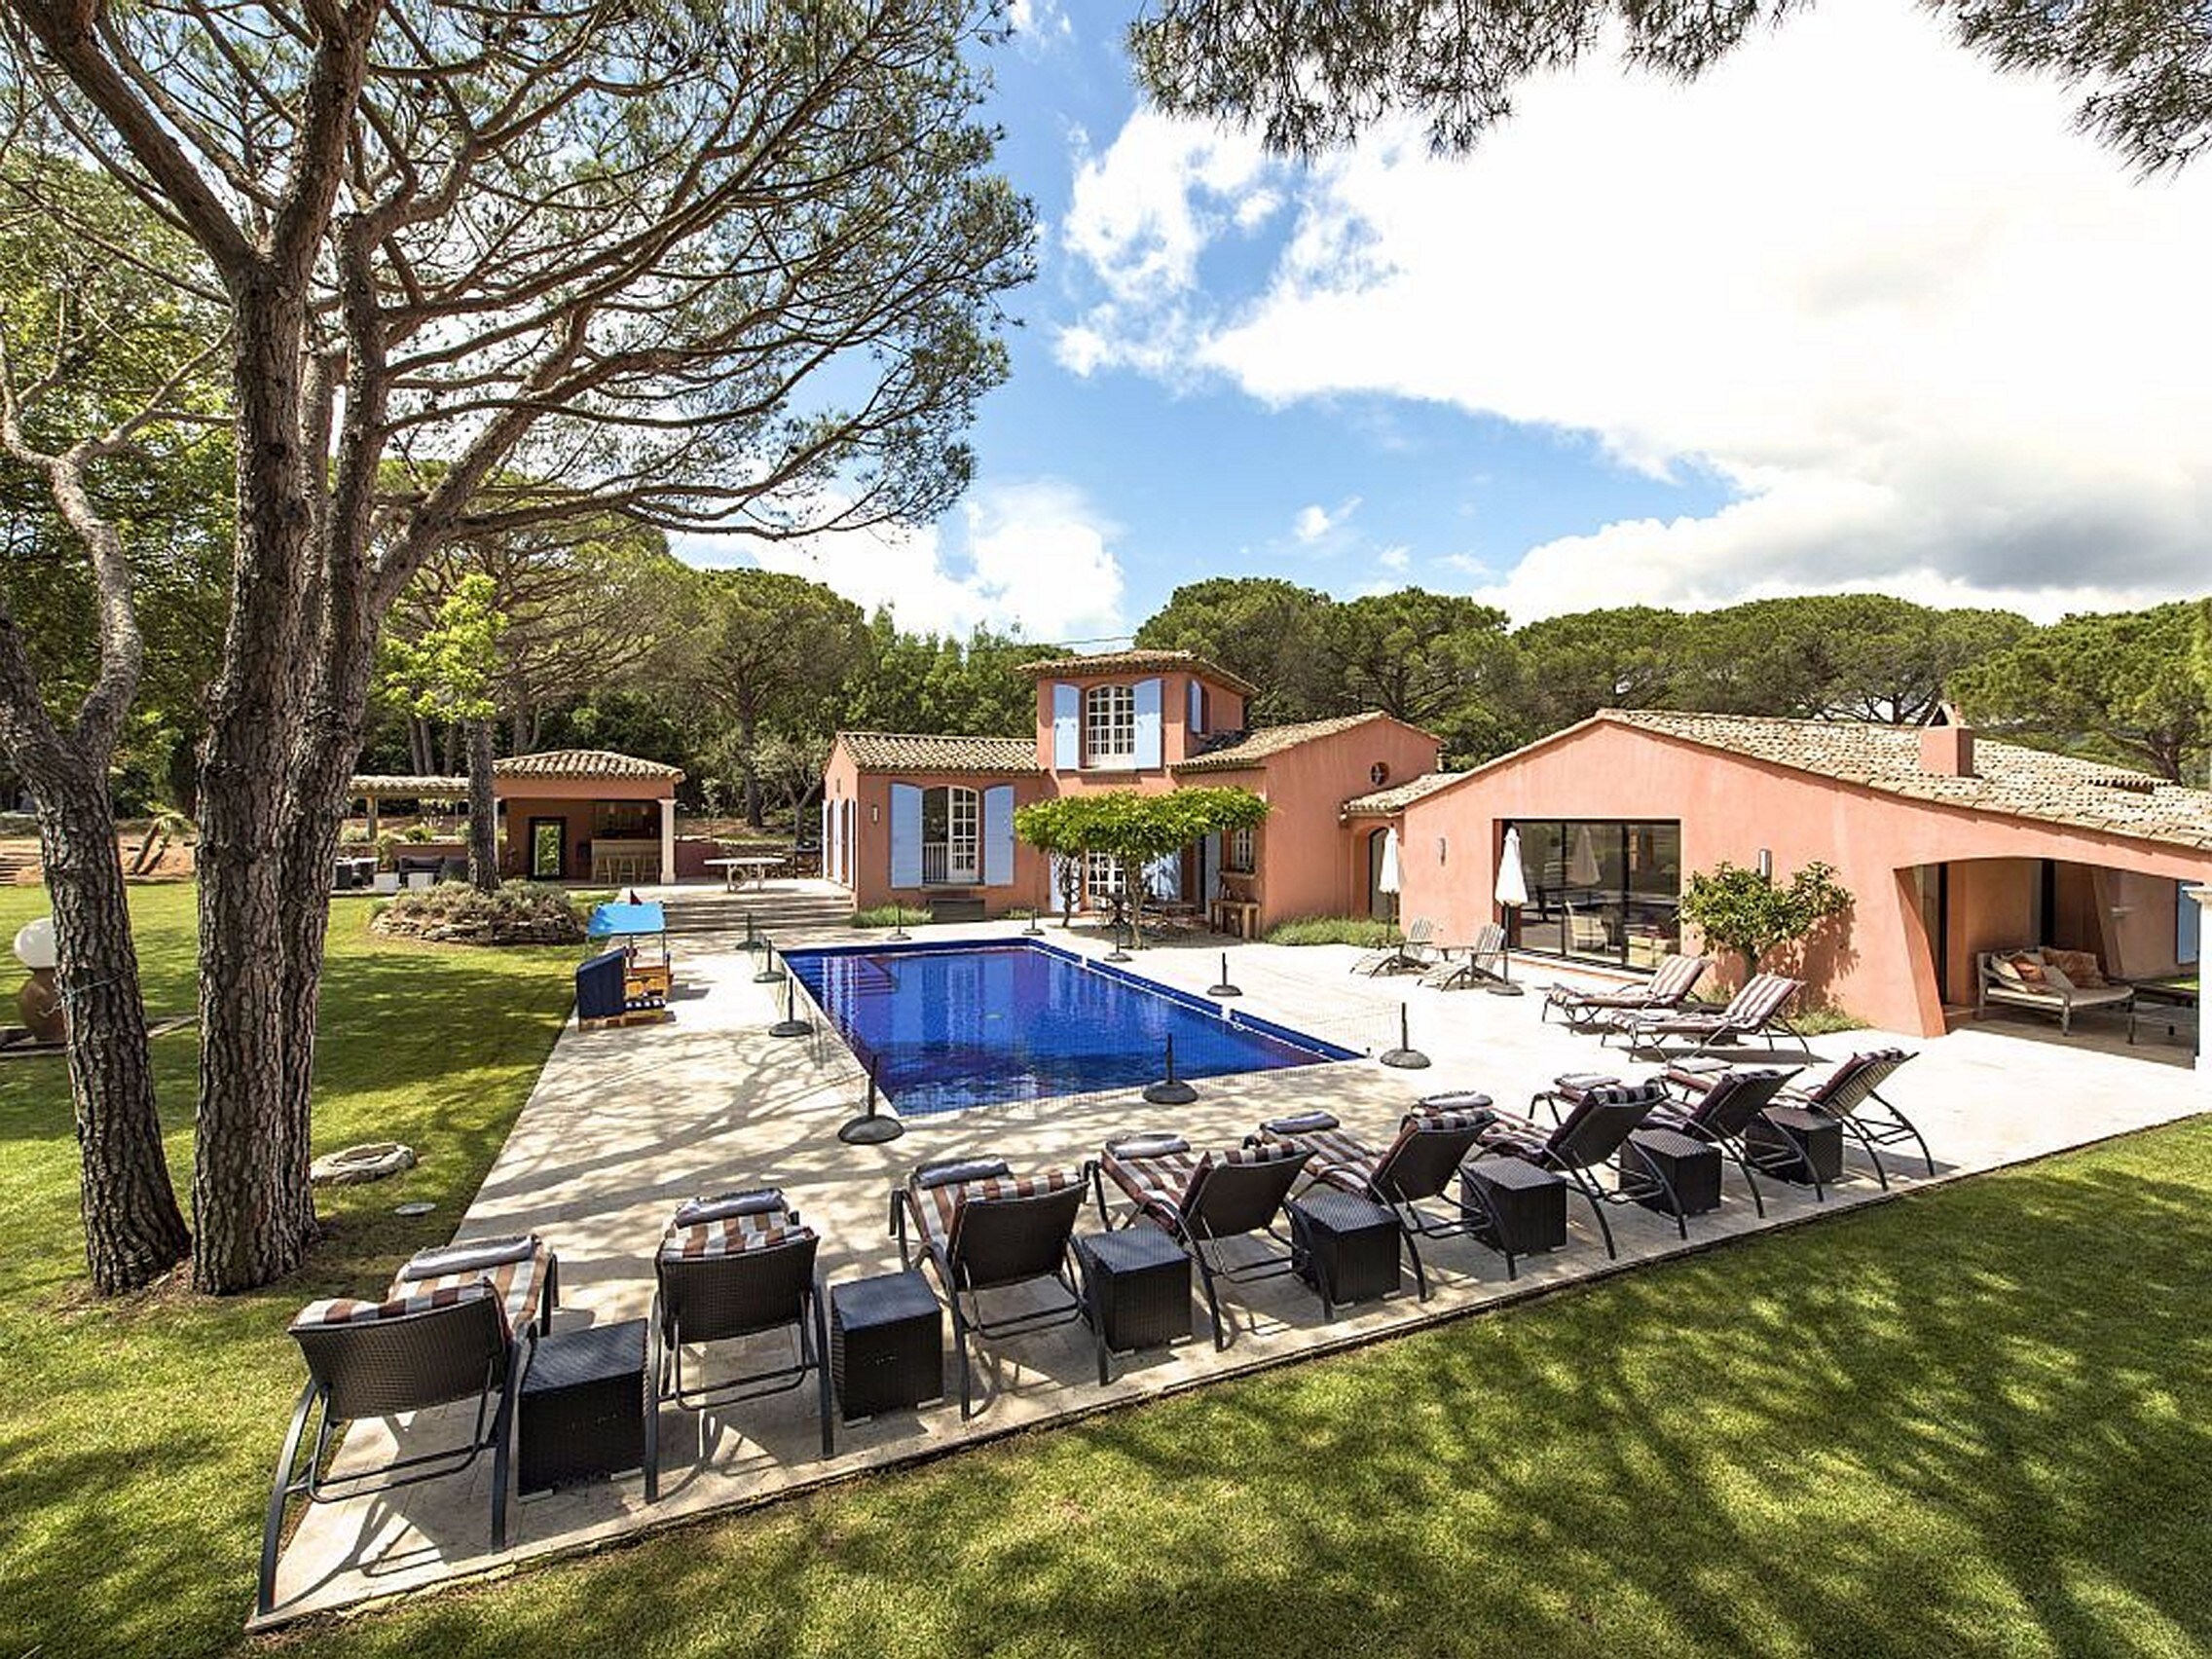 Property Image 1 - 6 bedroom family villa with pool, AC and large garden near Pampelonne beach